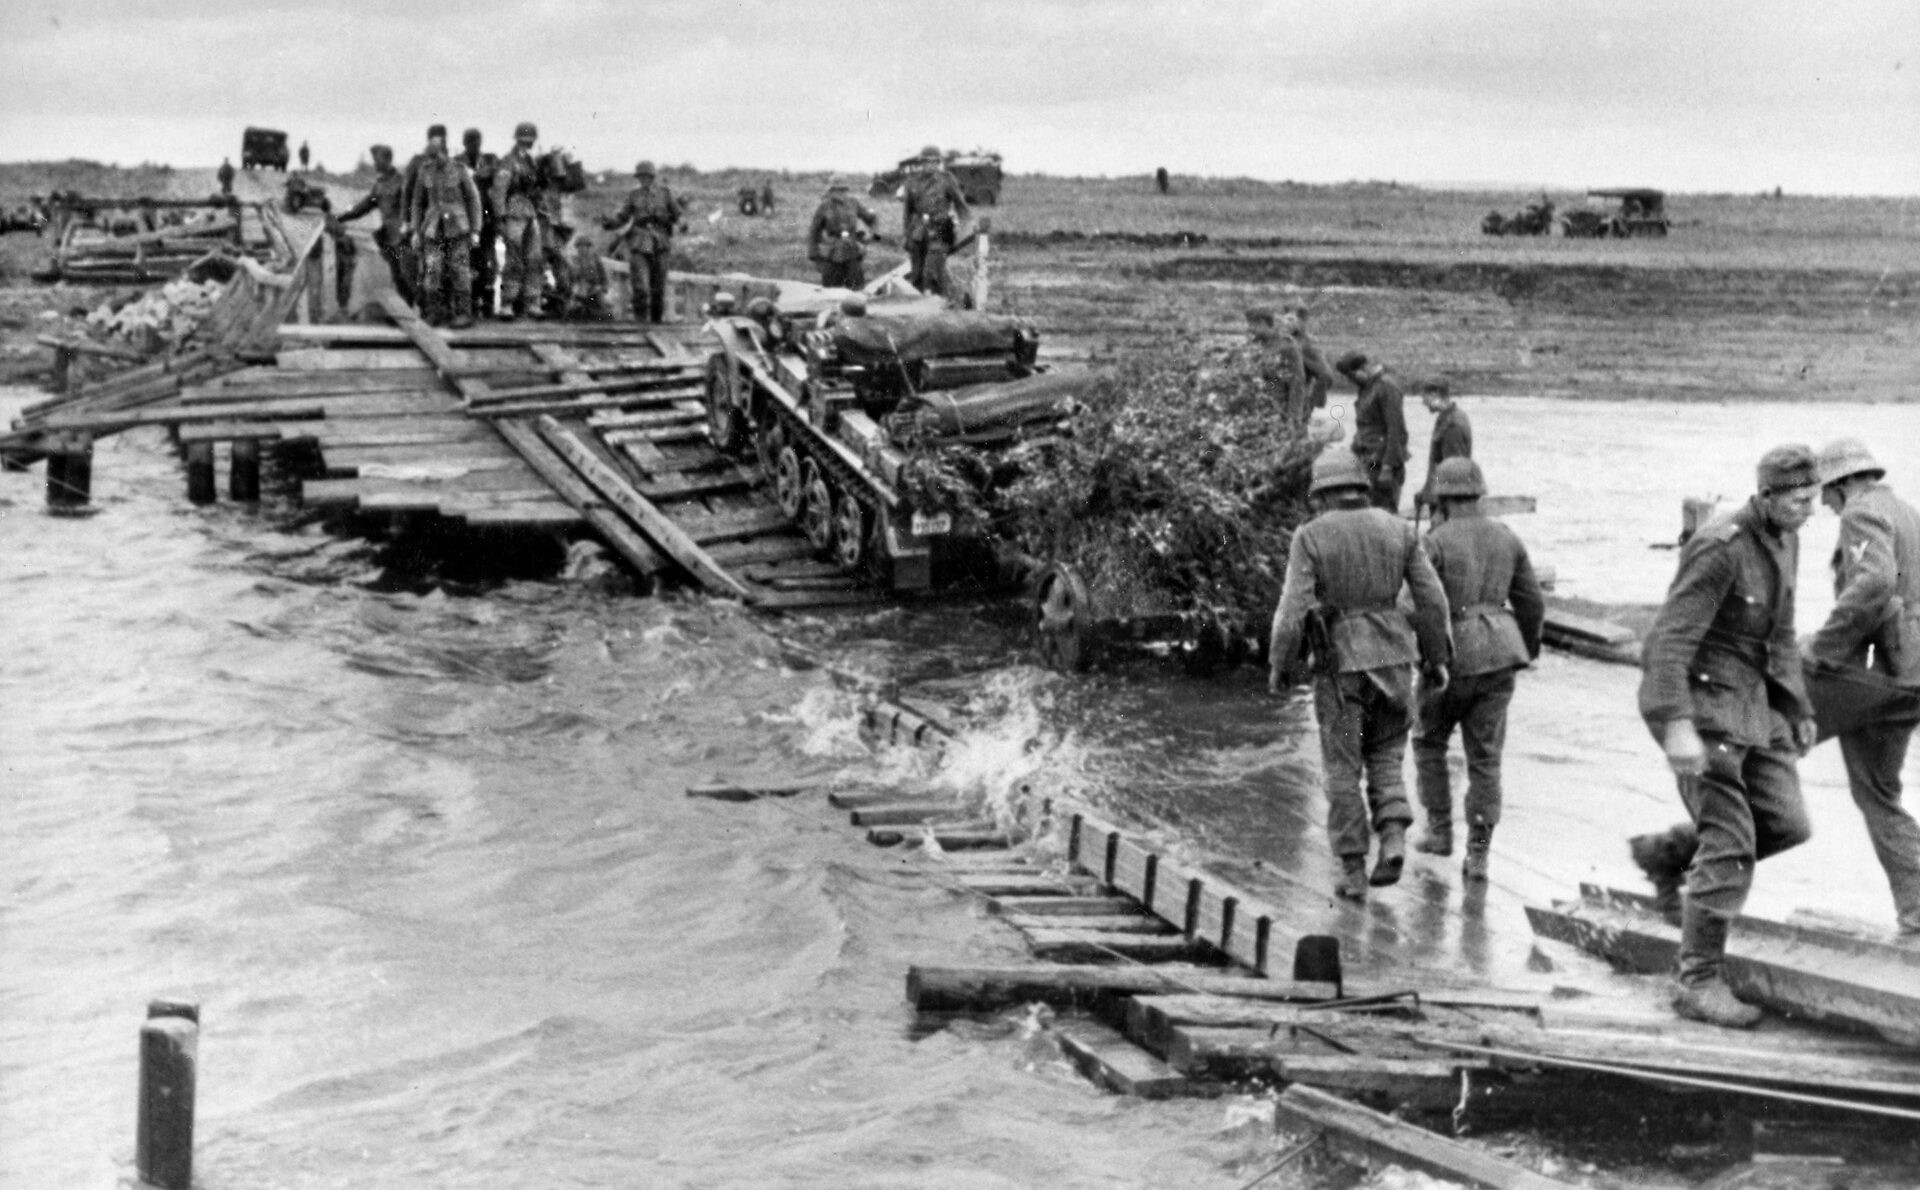 German armored vehicles struggle across a river during Operation Citadel. 